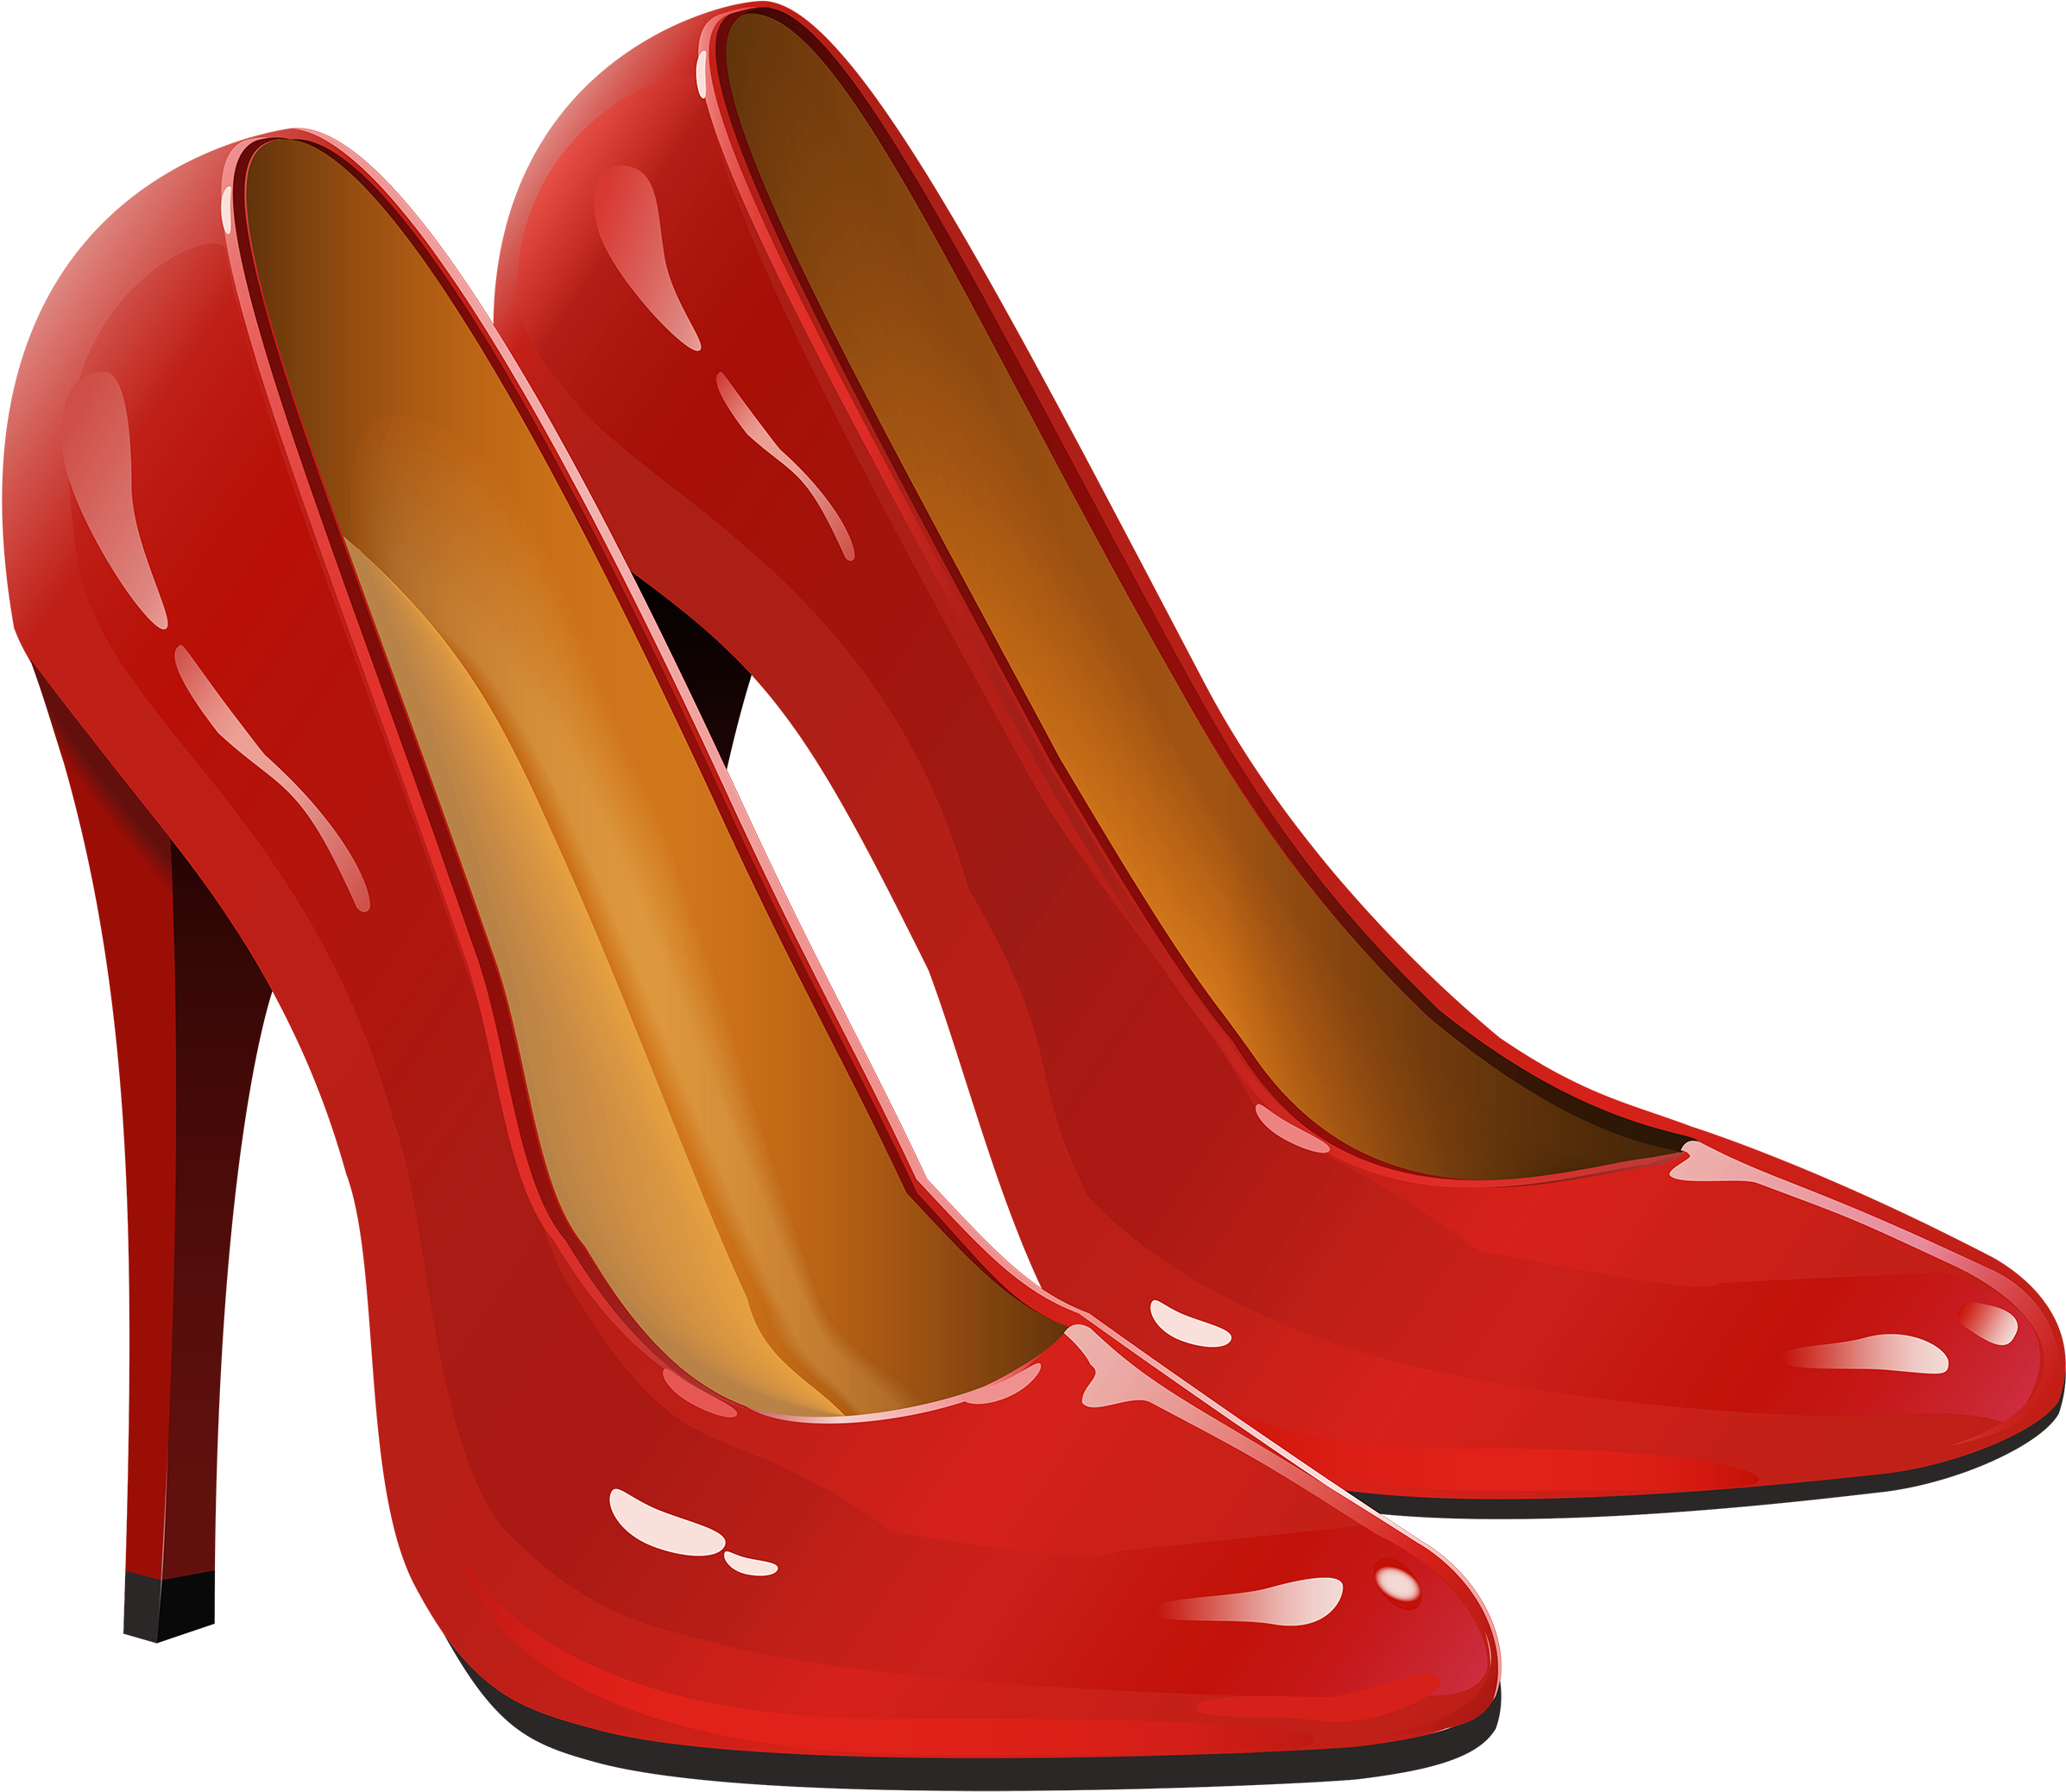 Red Women Shoes Png Transparent Image Clipart Shoes Clip Art Library